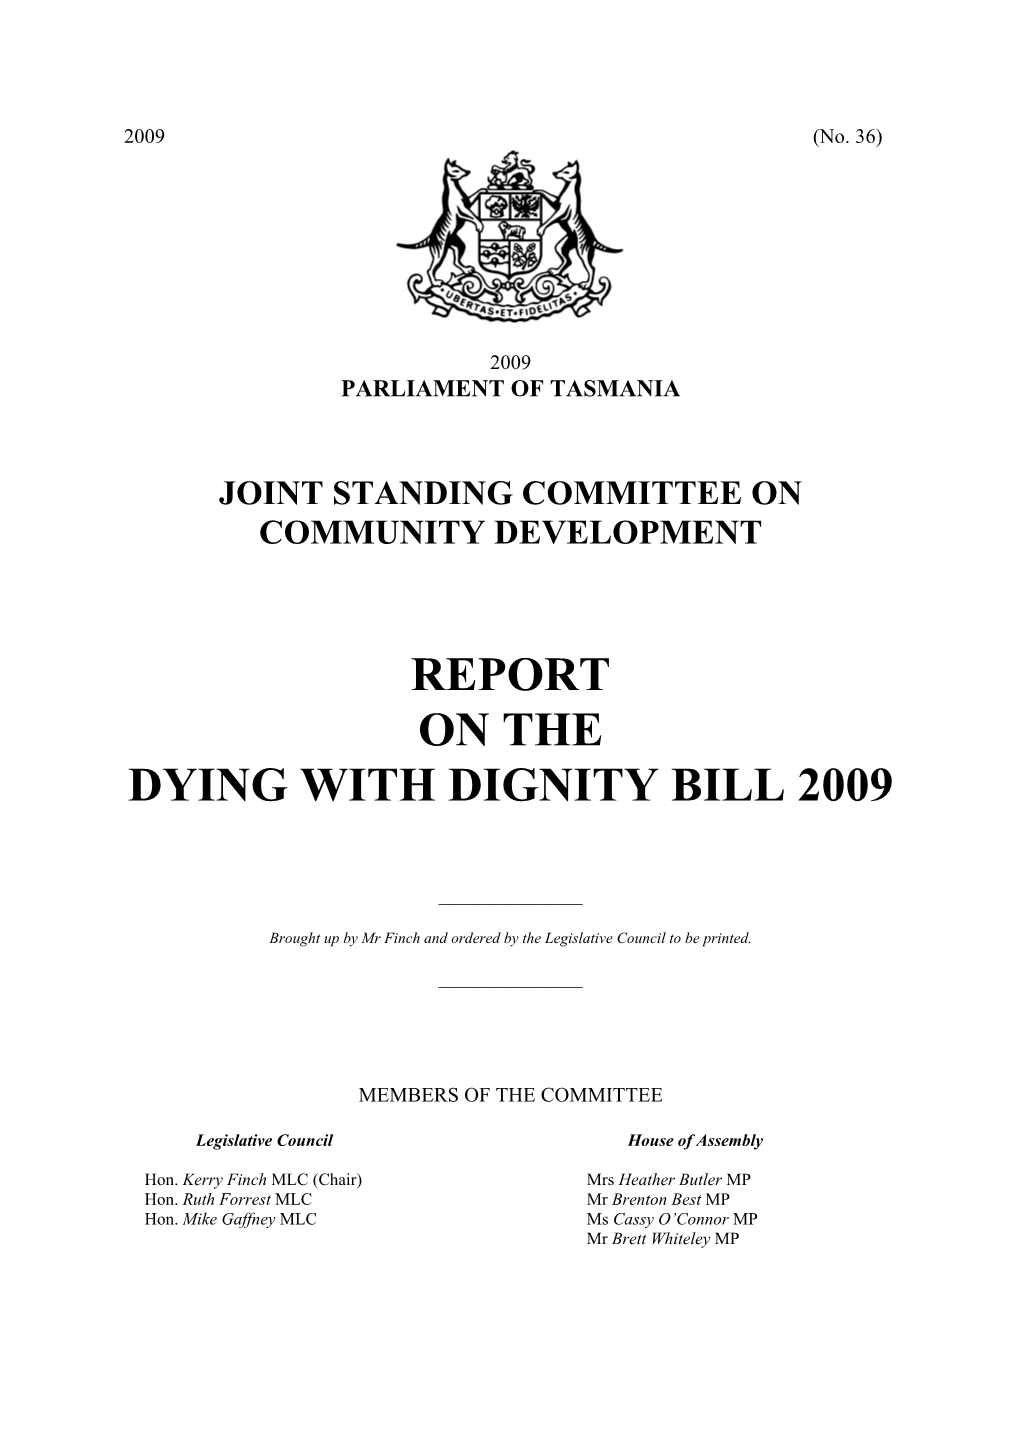 Report on the Dying with Dignity Bill 2009